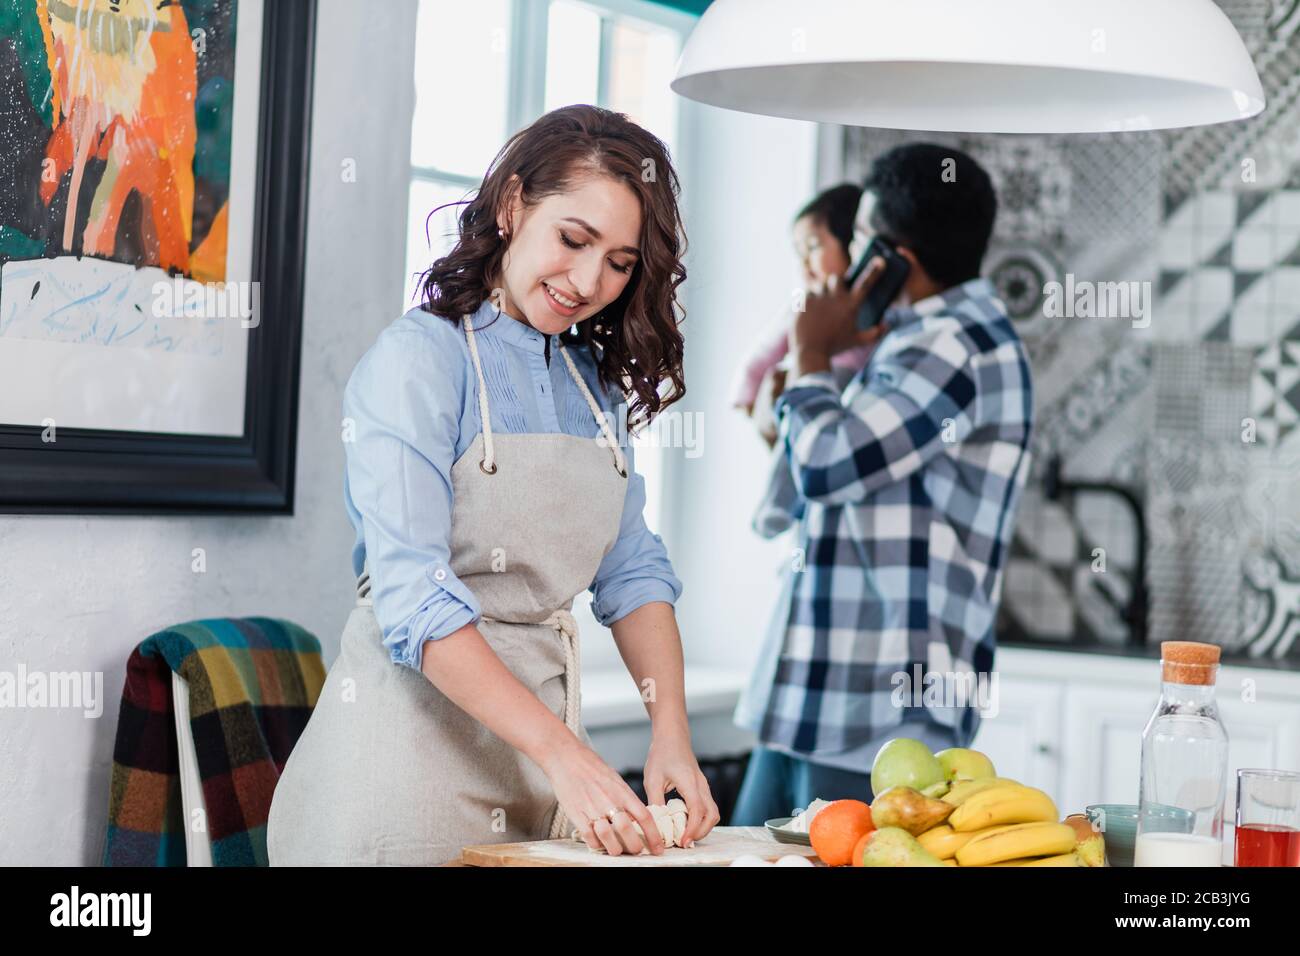 attractive housewife making salad for family while her husband having a chat, close up photo. Stock Photo